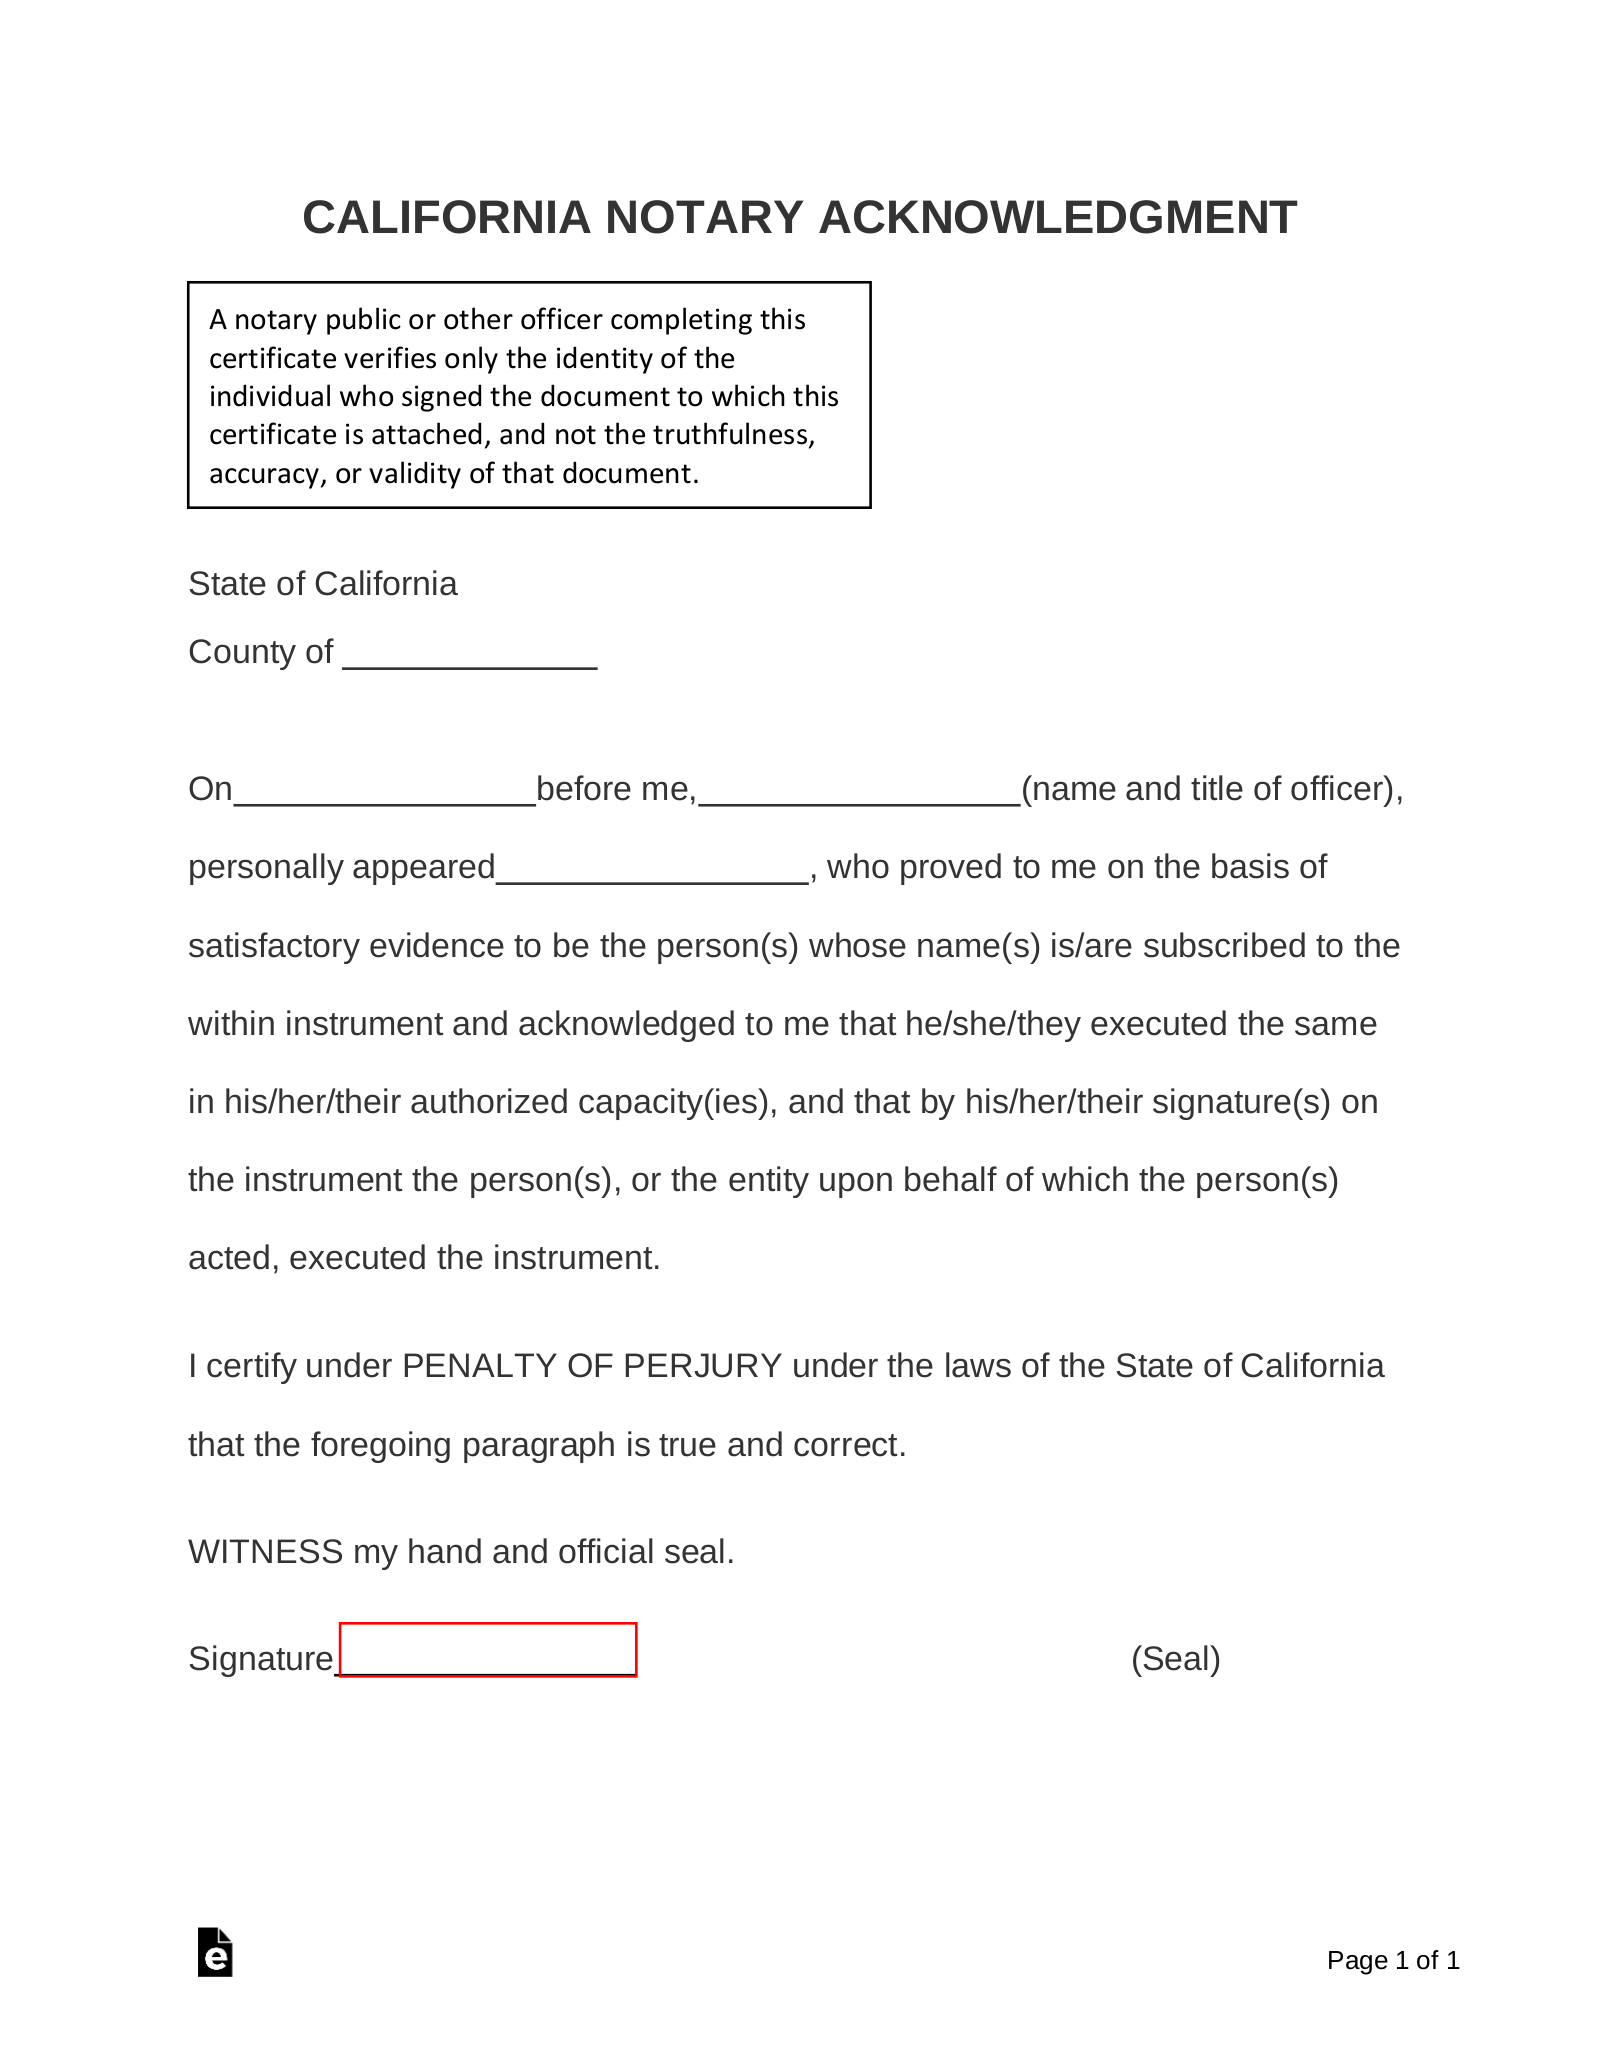 California Notary Acknowledgment Form